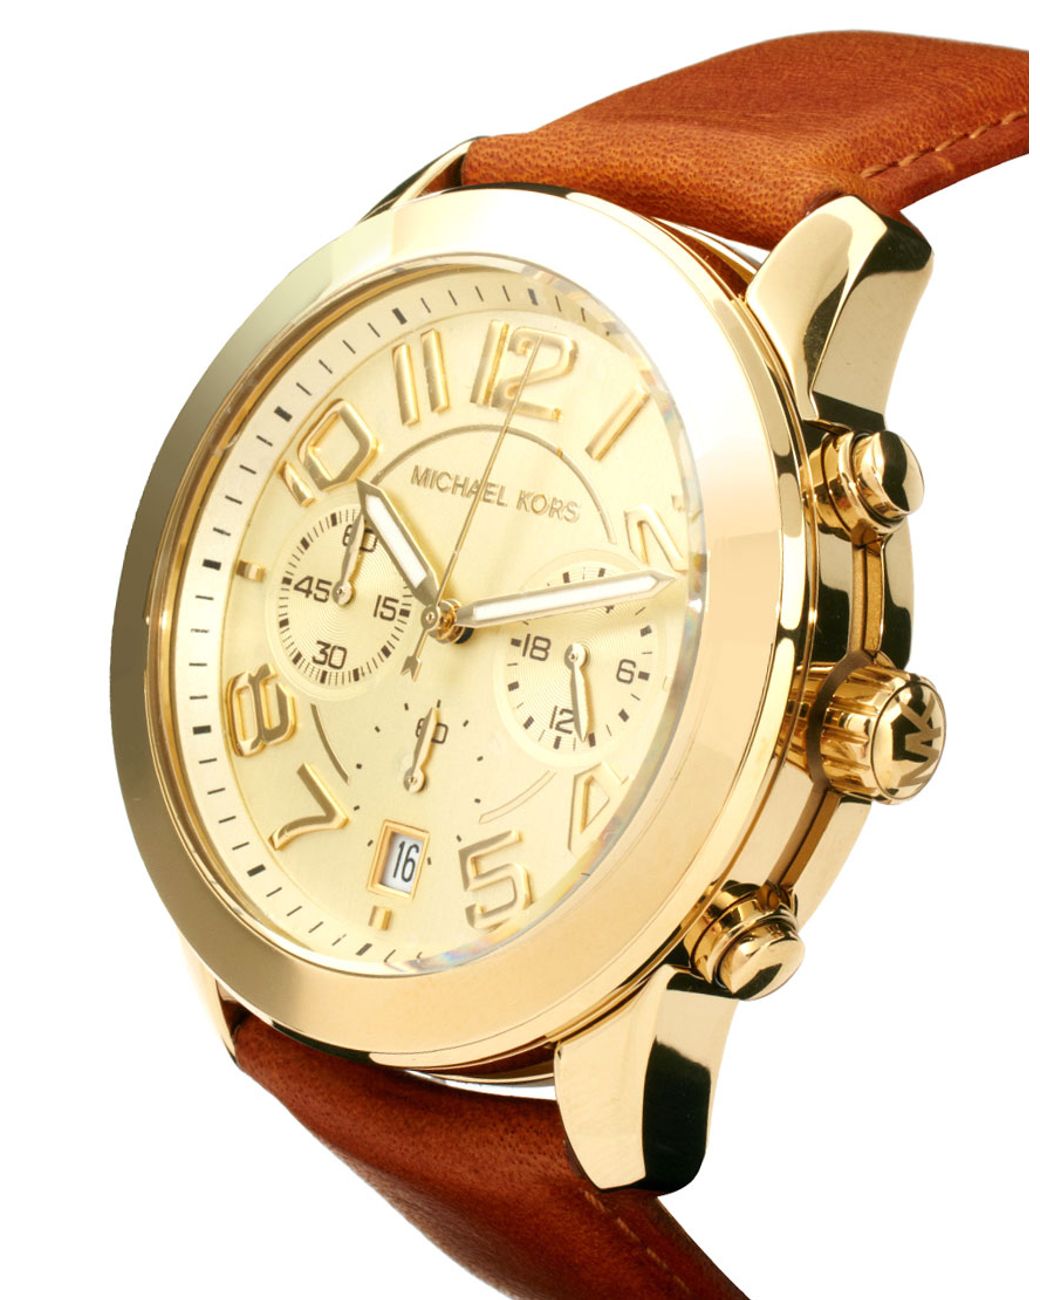 Michael Kors Leather Strap Watch with Gold Chronograph Face in Brown | Lyst